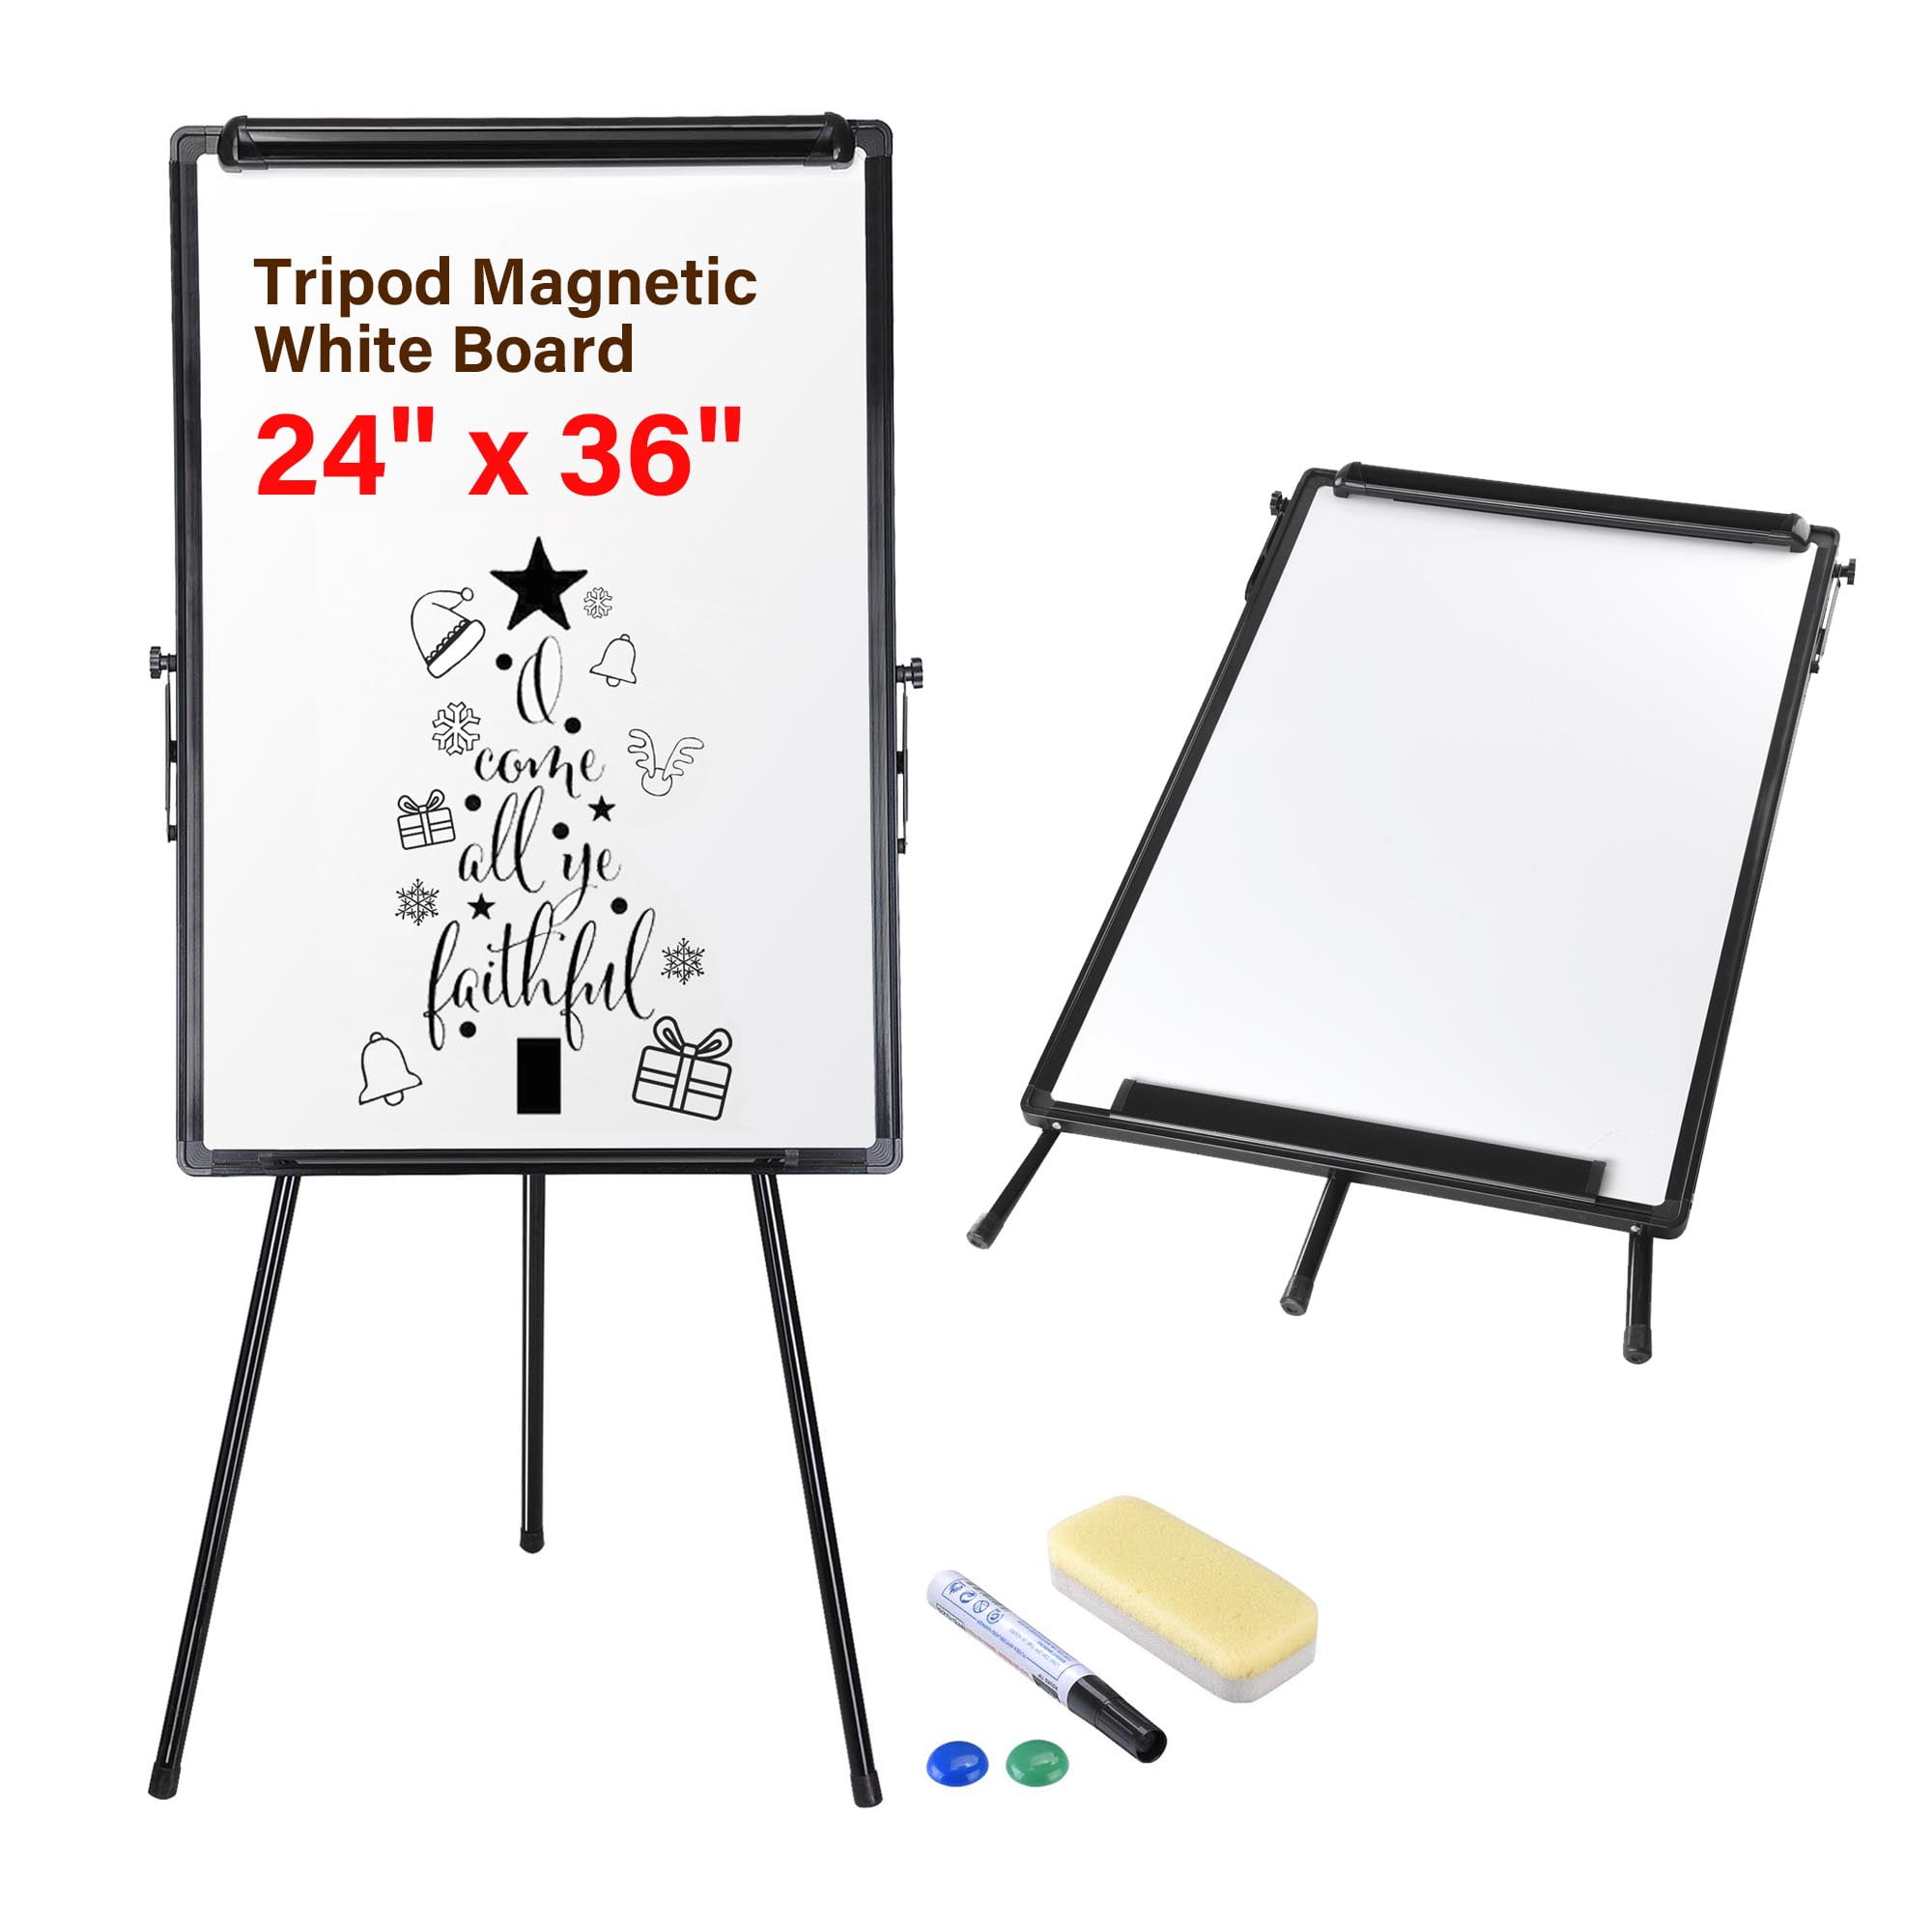 Height Adjustable U Stand Whiteboard 24 x 36 White Board Double Sided Easel 